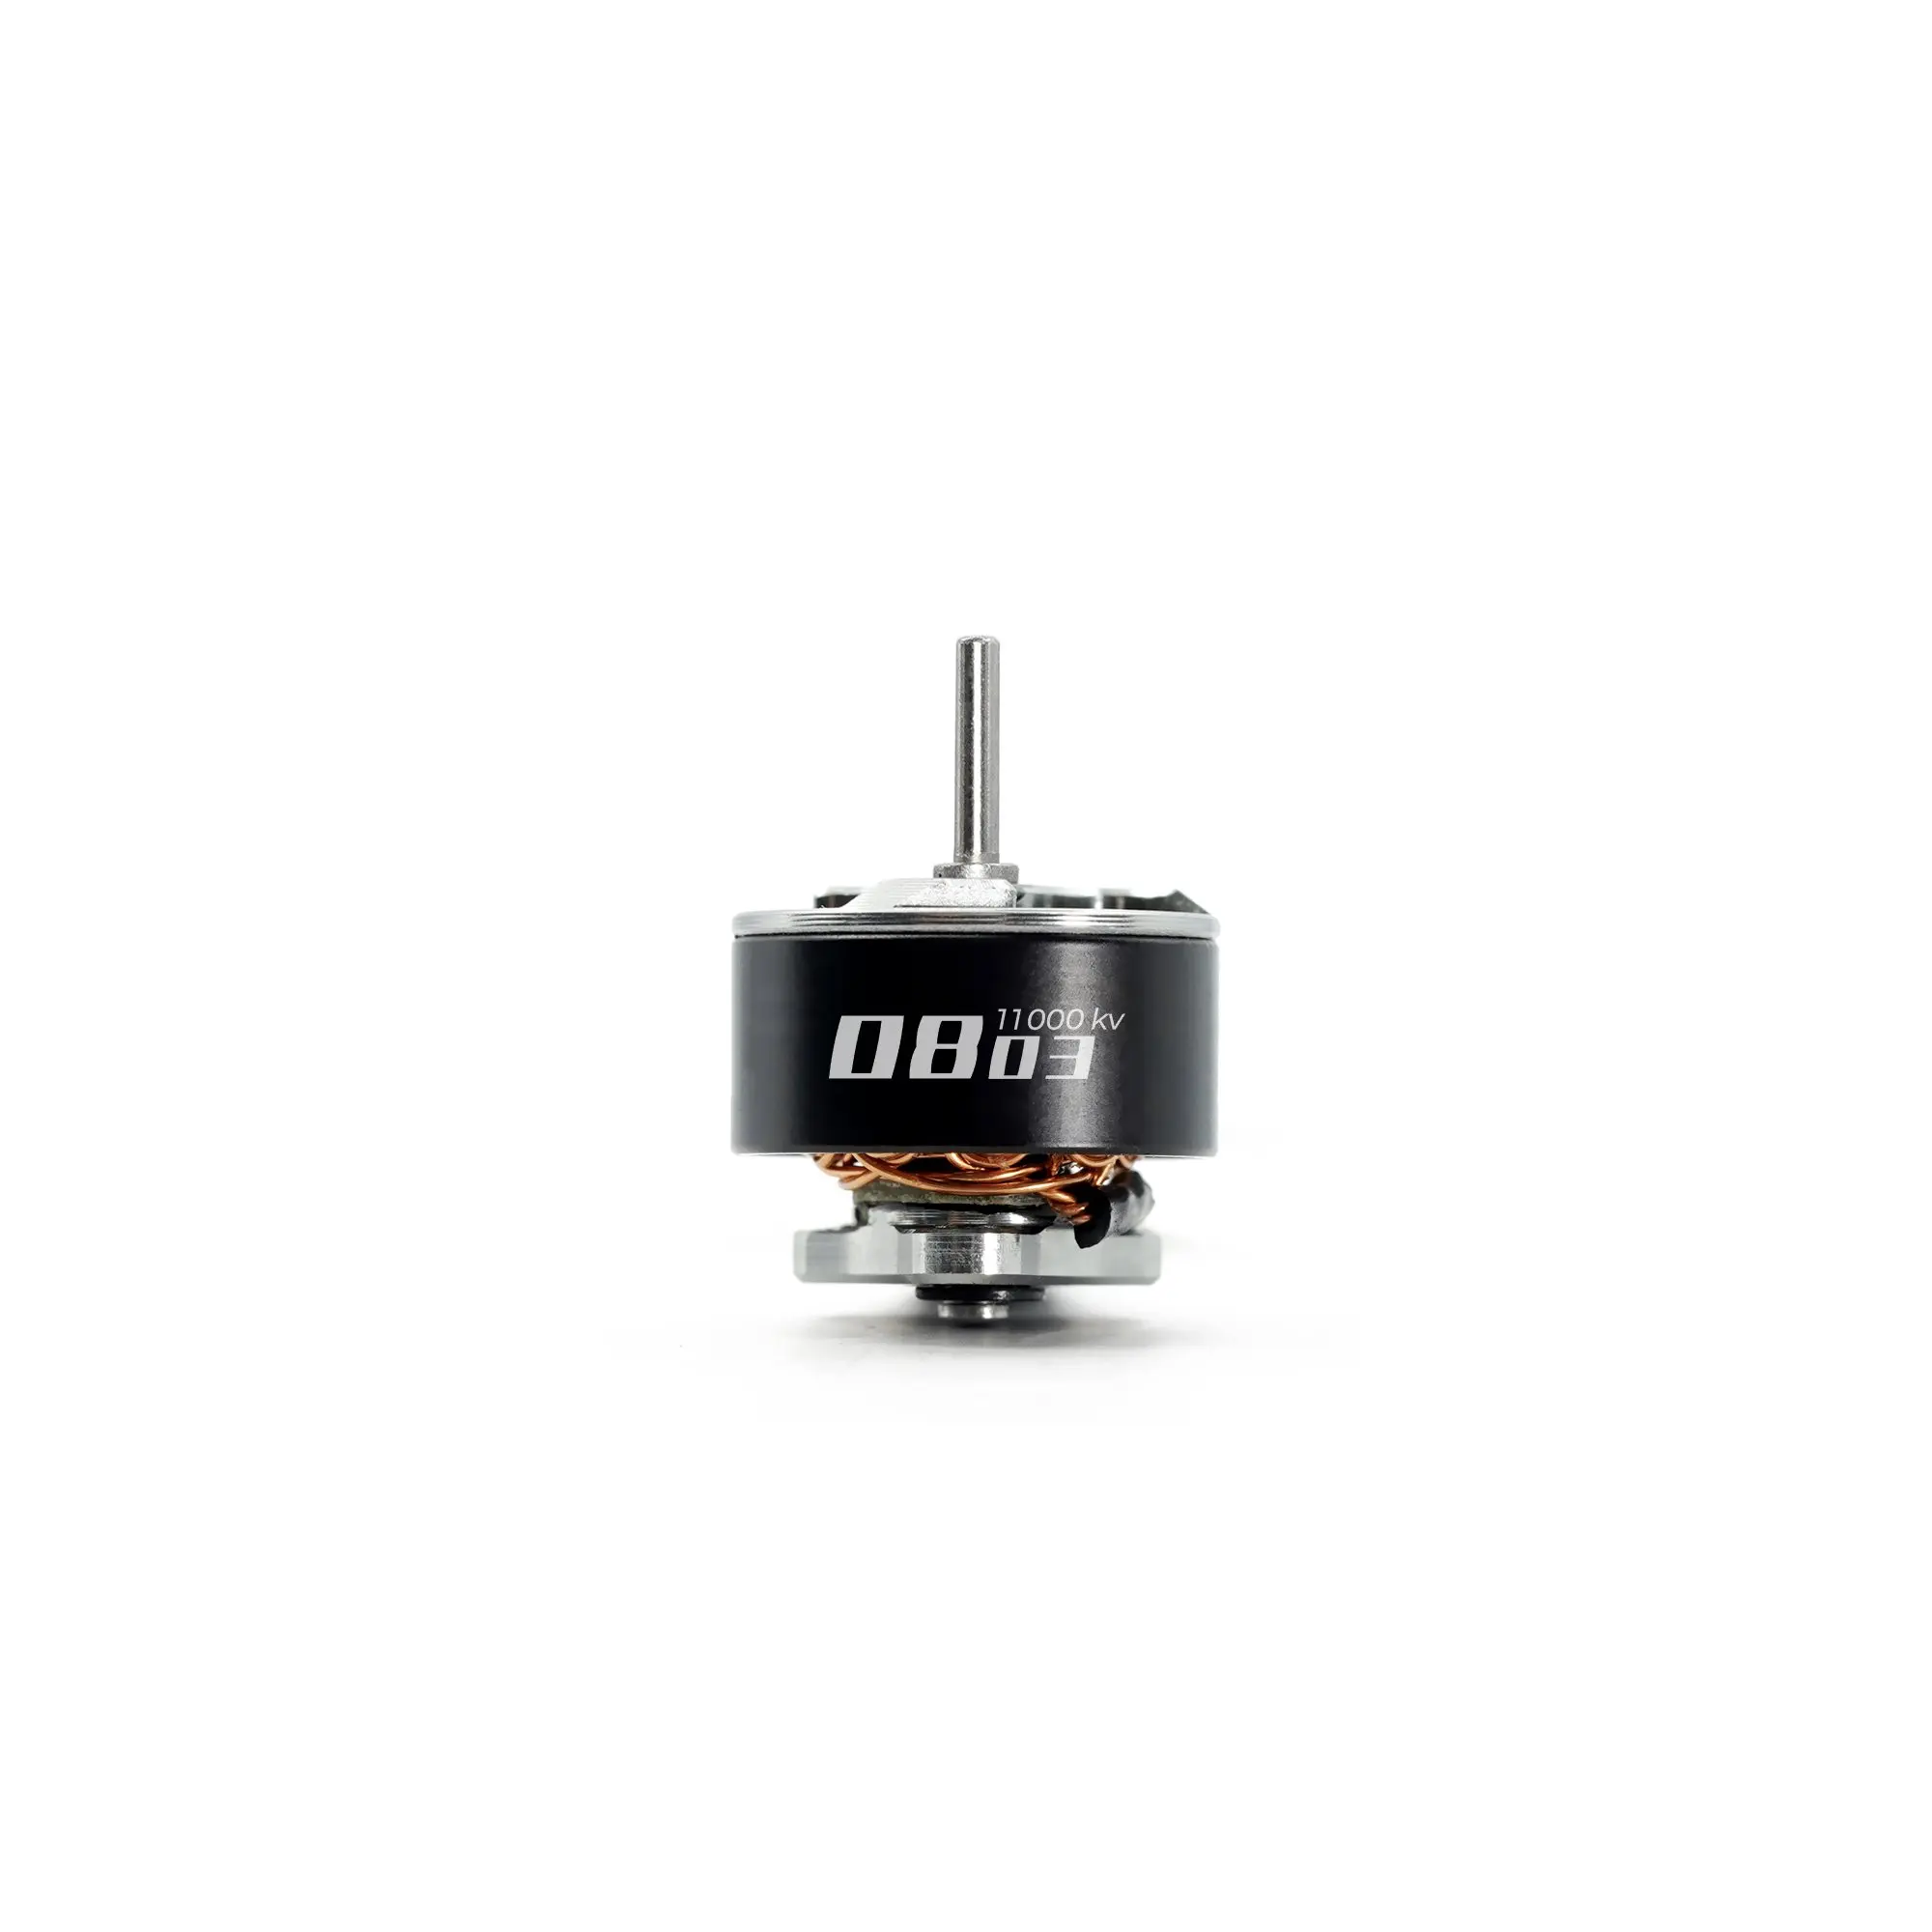 

GEPRC SPEEDX2 0803 11000KV 2S Brushless Motor for RC FPV Tinywhoop Micro Drones Smart16 DIY Parts